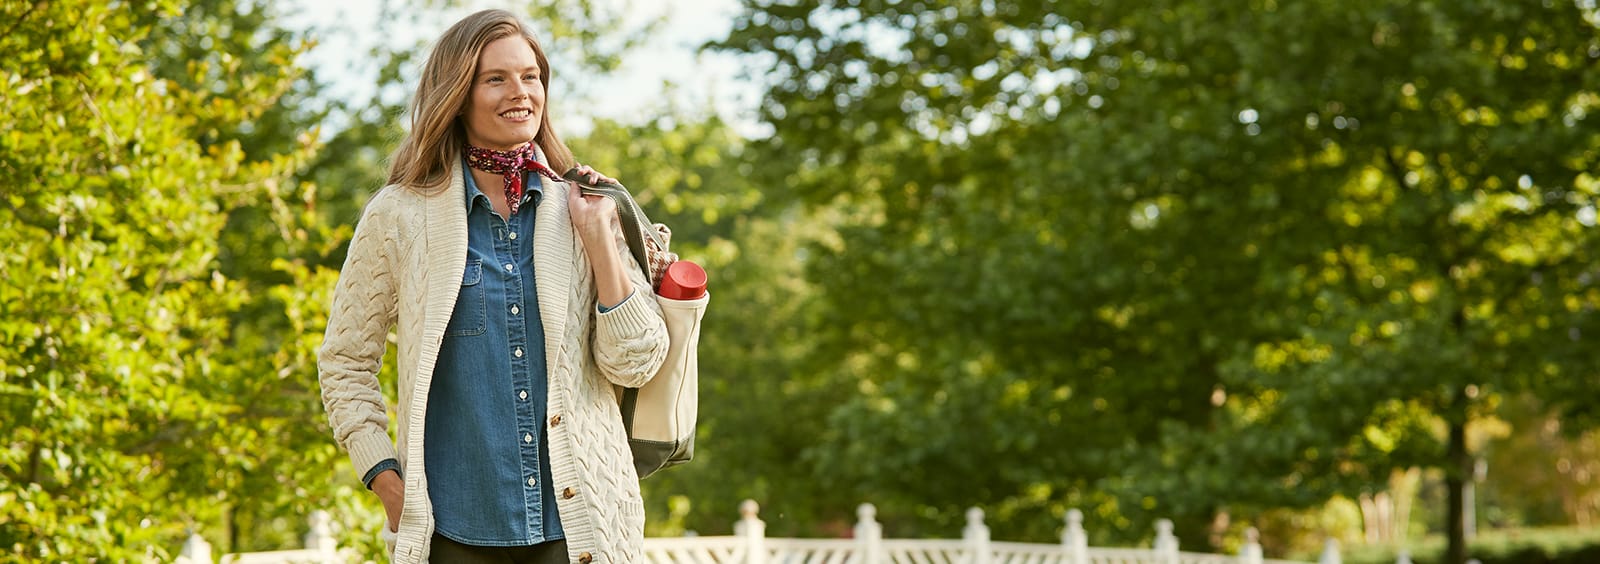 10 Fall Essentials for Women in Their 30s